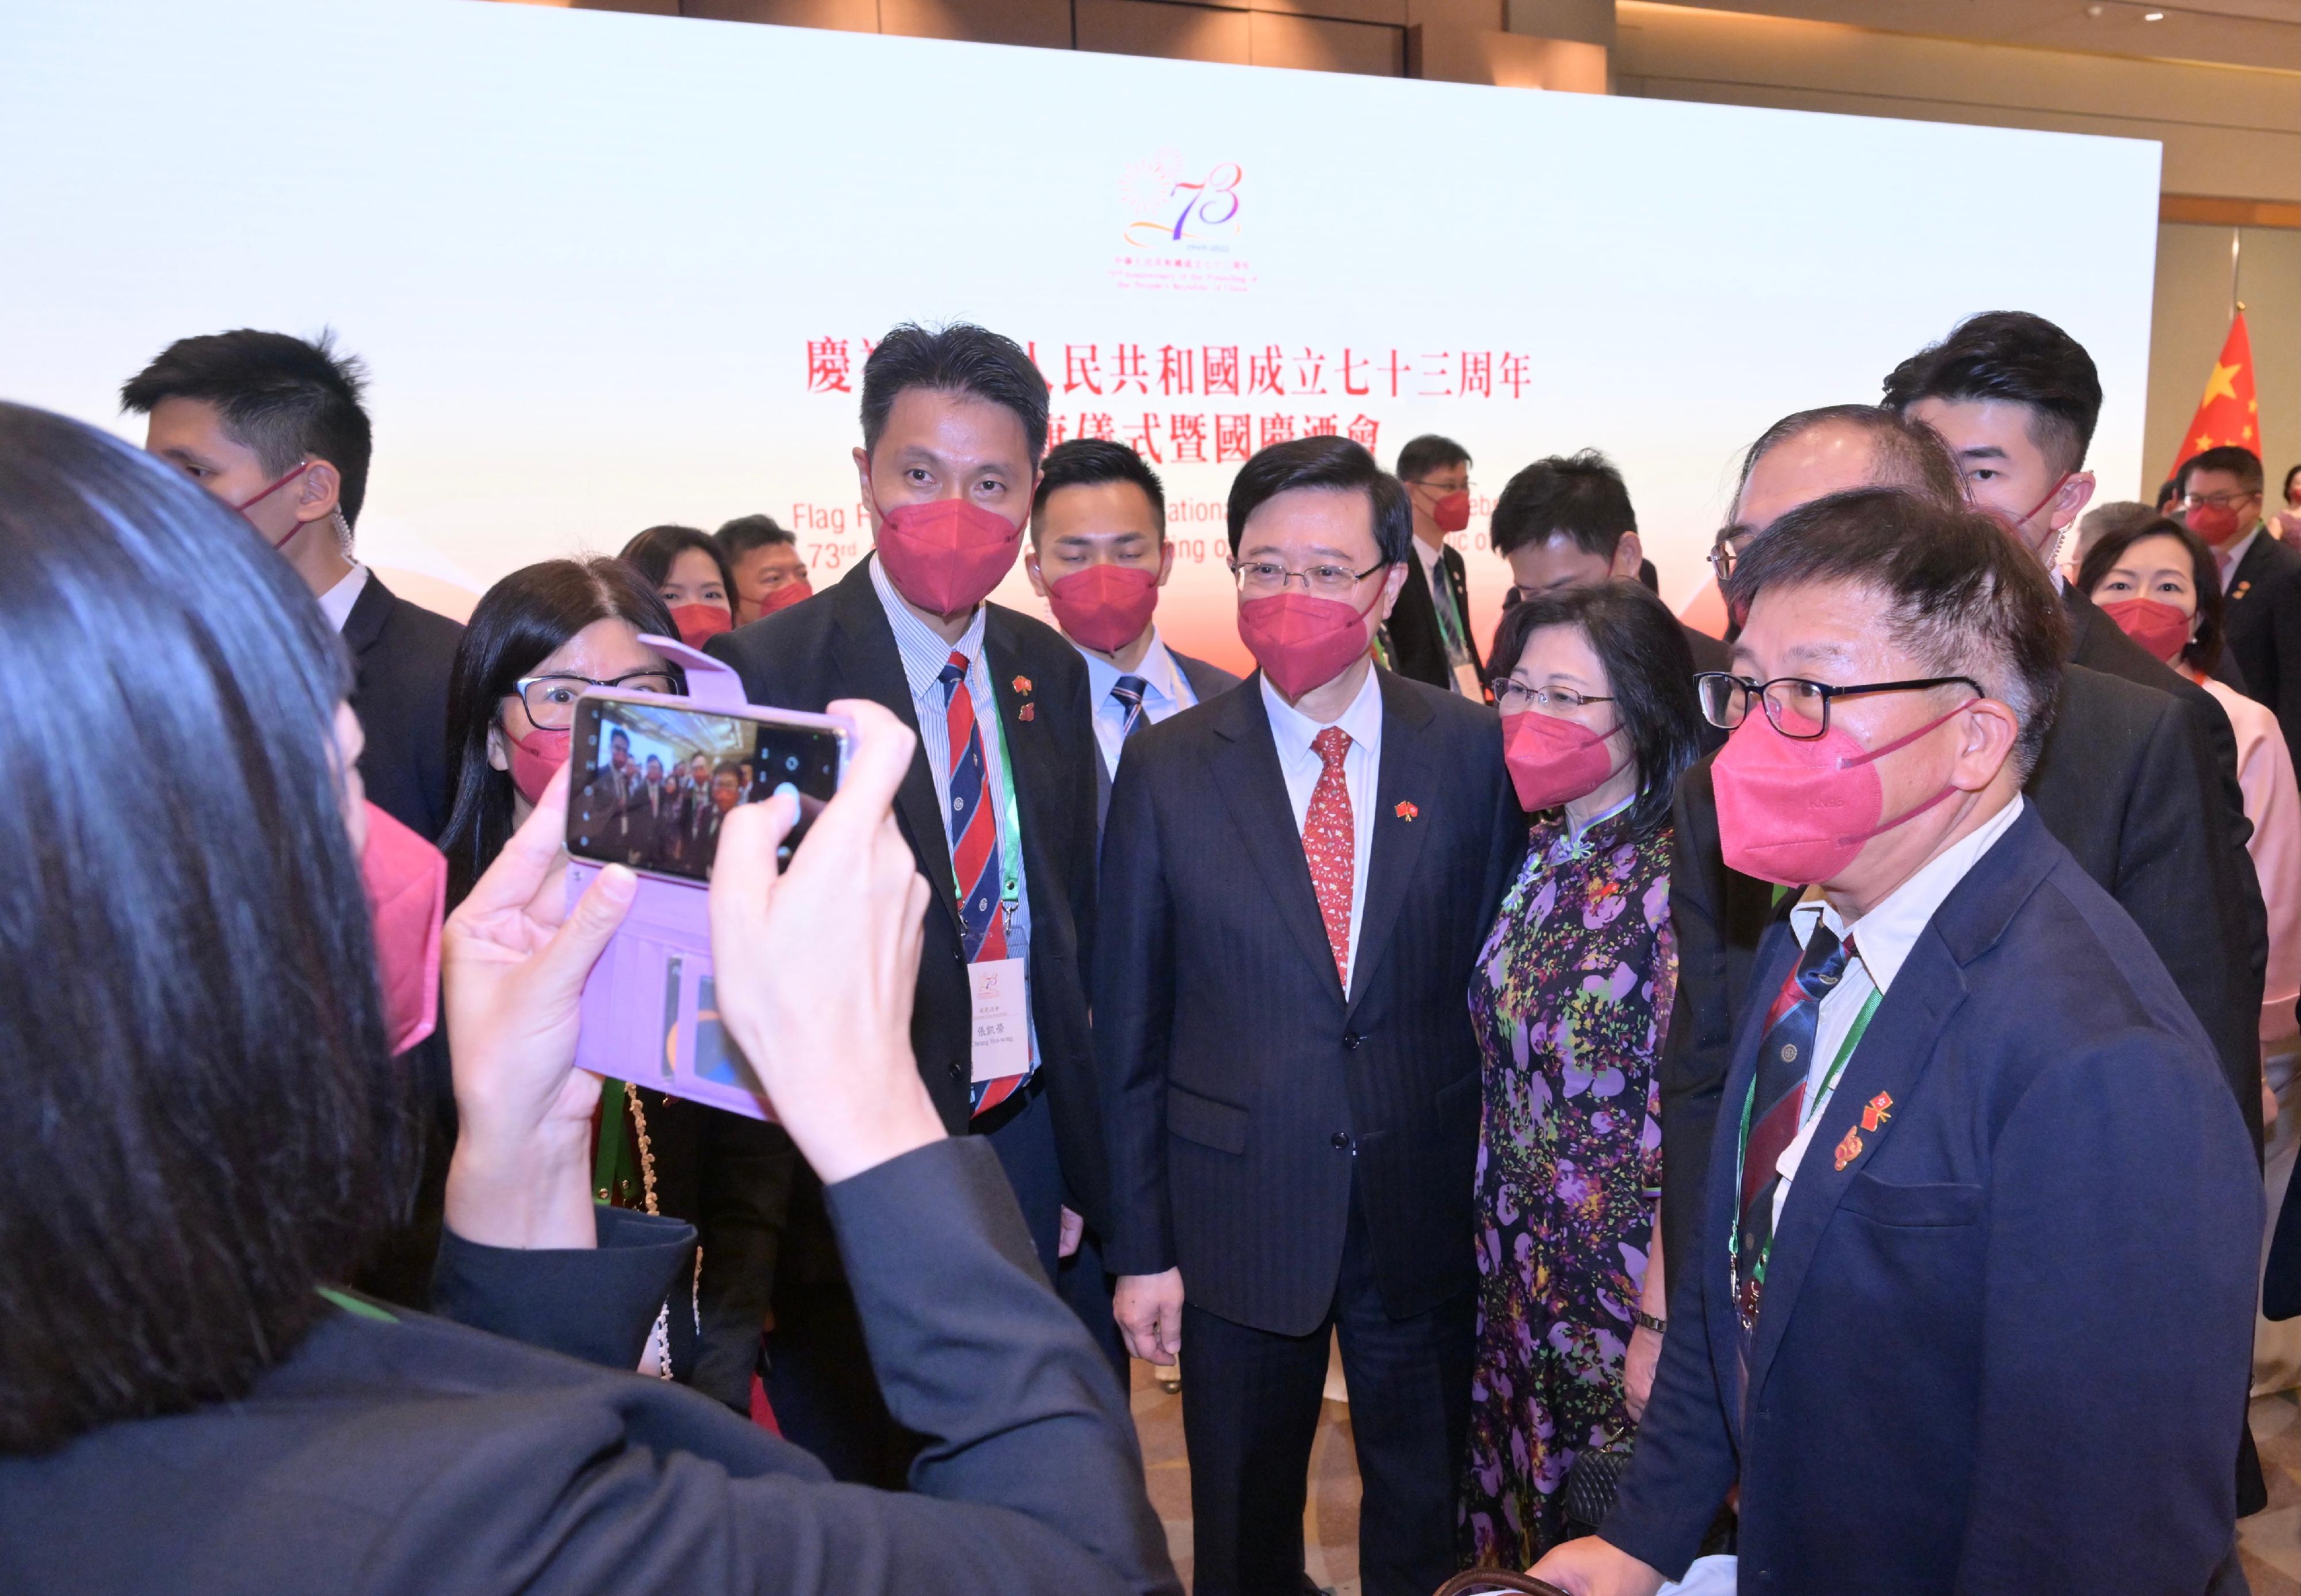 The Chief Executive, Mr John Lee (front, third right), and his wife Mrs Lee (front, second right), are pictured with guests at the reception in celebration of the 73rd anniversary of the founding of the People's Republic of China at the Hong Kong Convention and Exhibition Centre this morning (October 1).